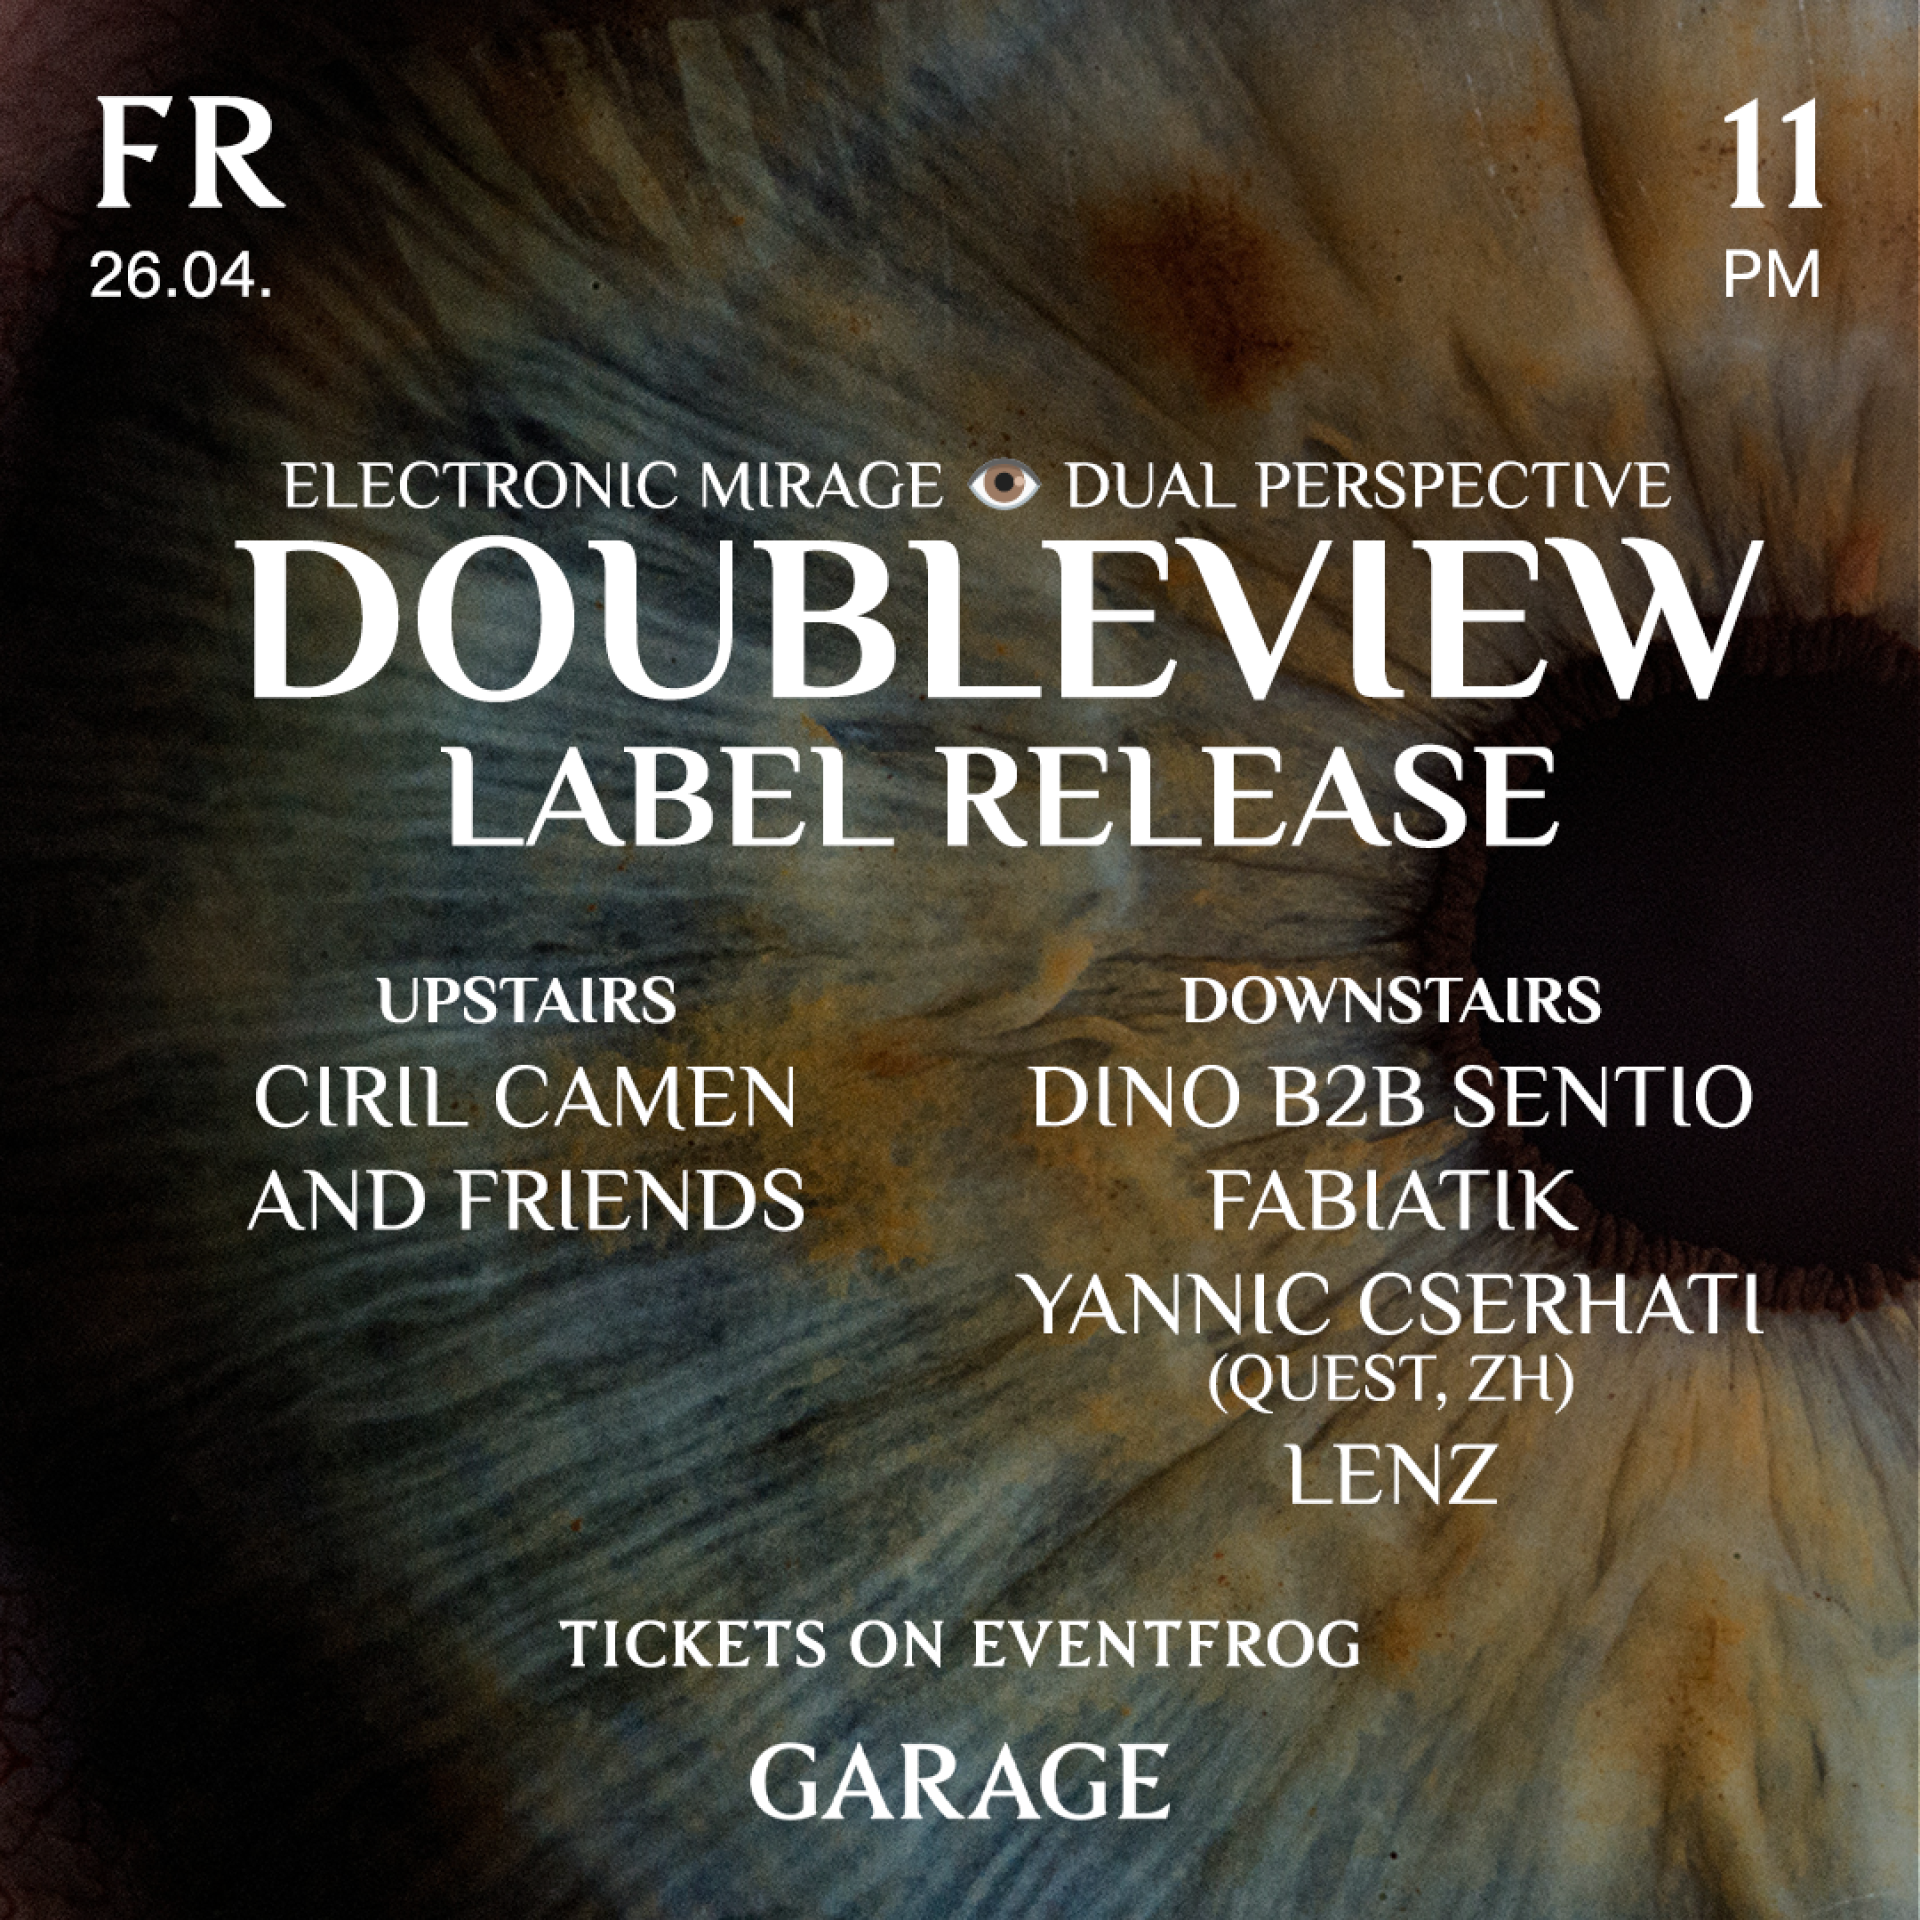 DOUBLEVIEW goes GARAGE!